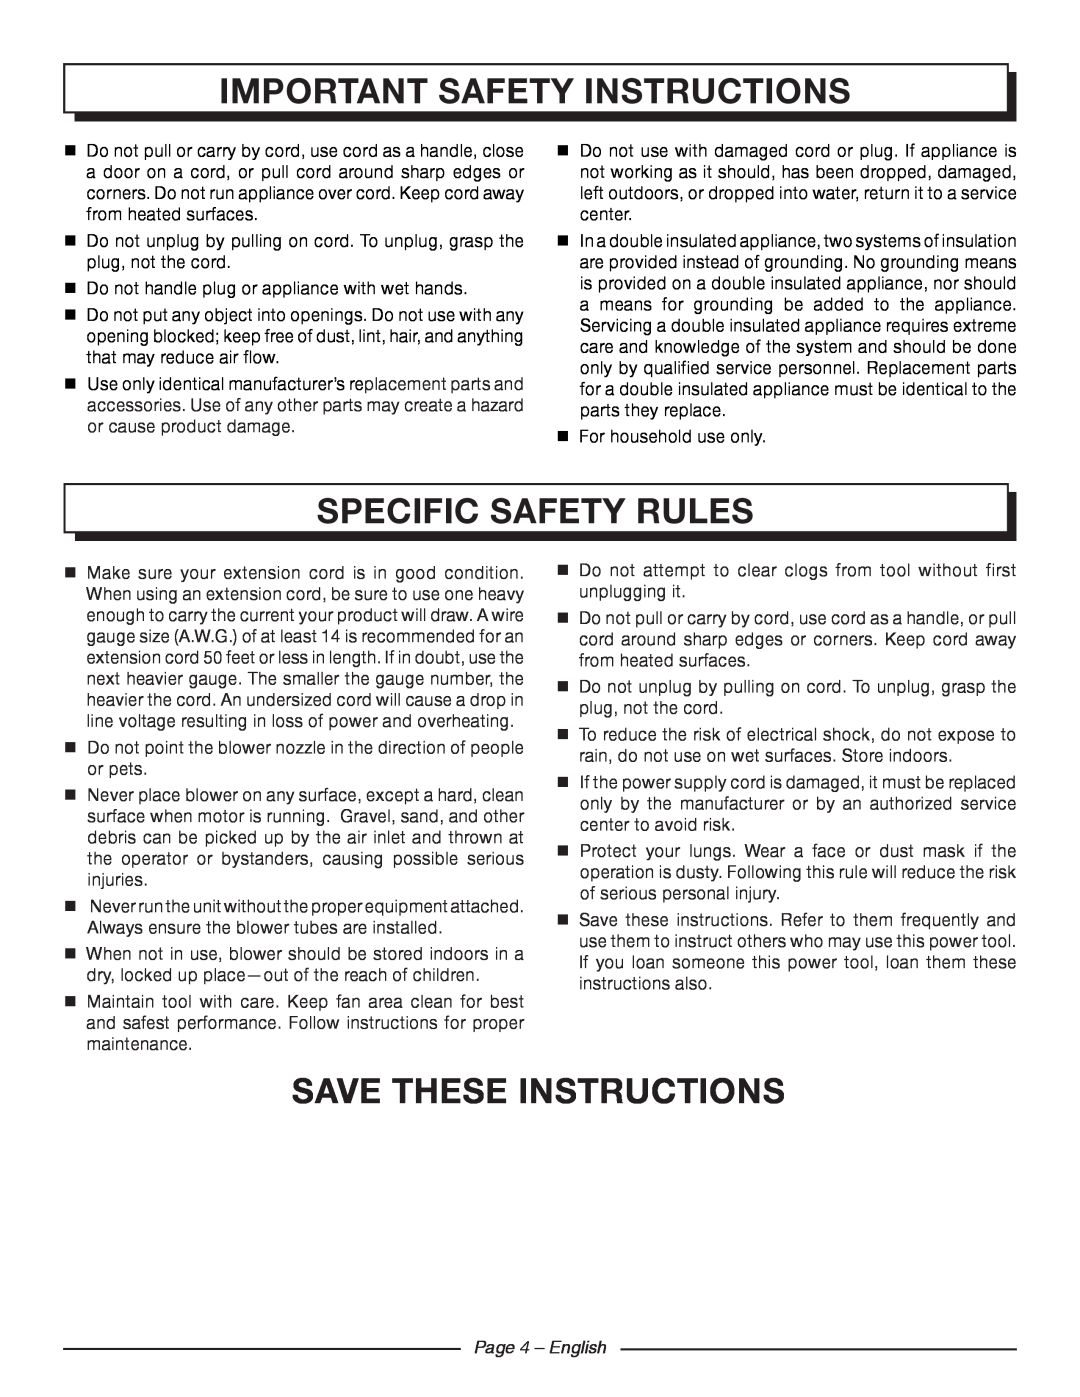 Homelite UT42100 Specific Safety Rules, Save these instructions, Page 4 - English, important safety instructions 